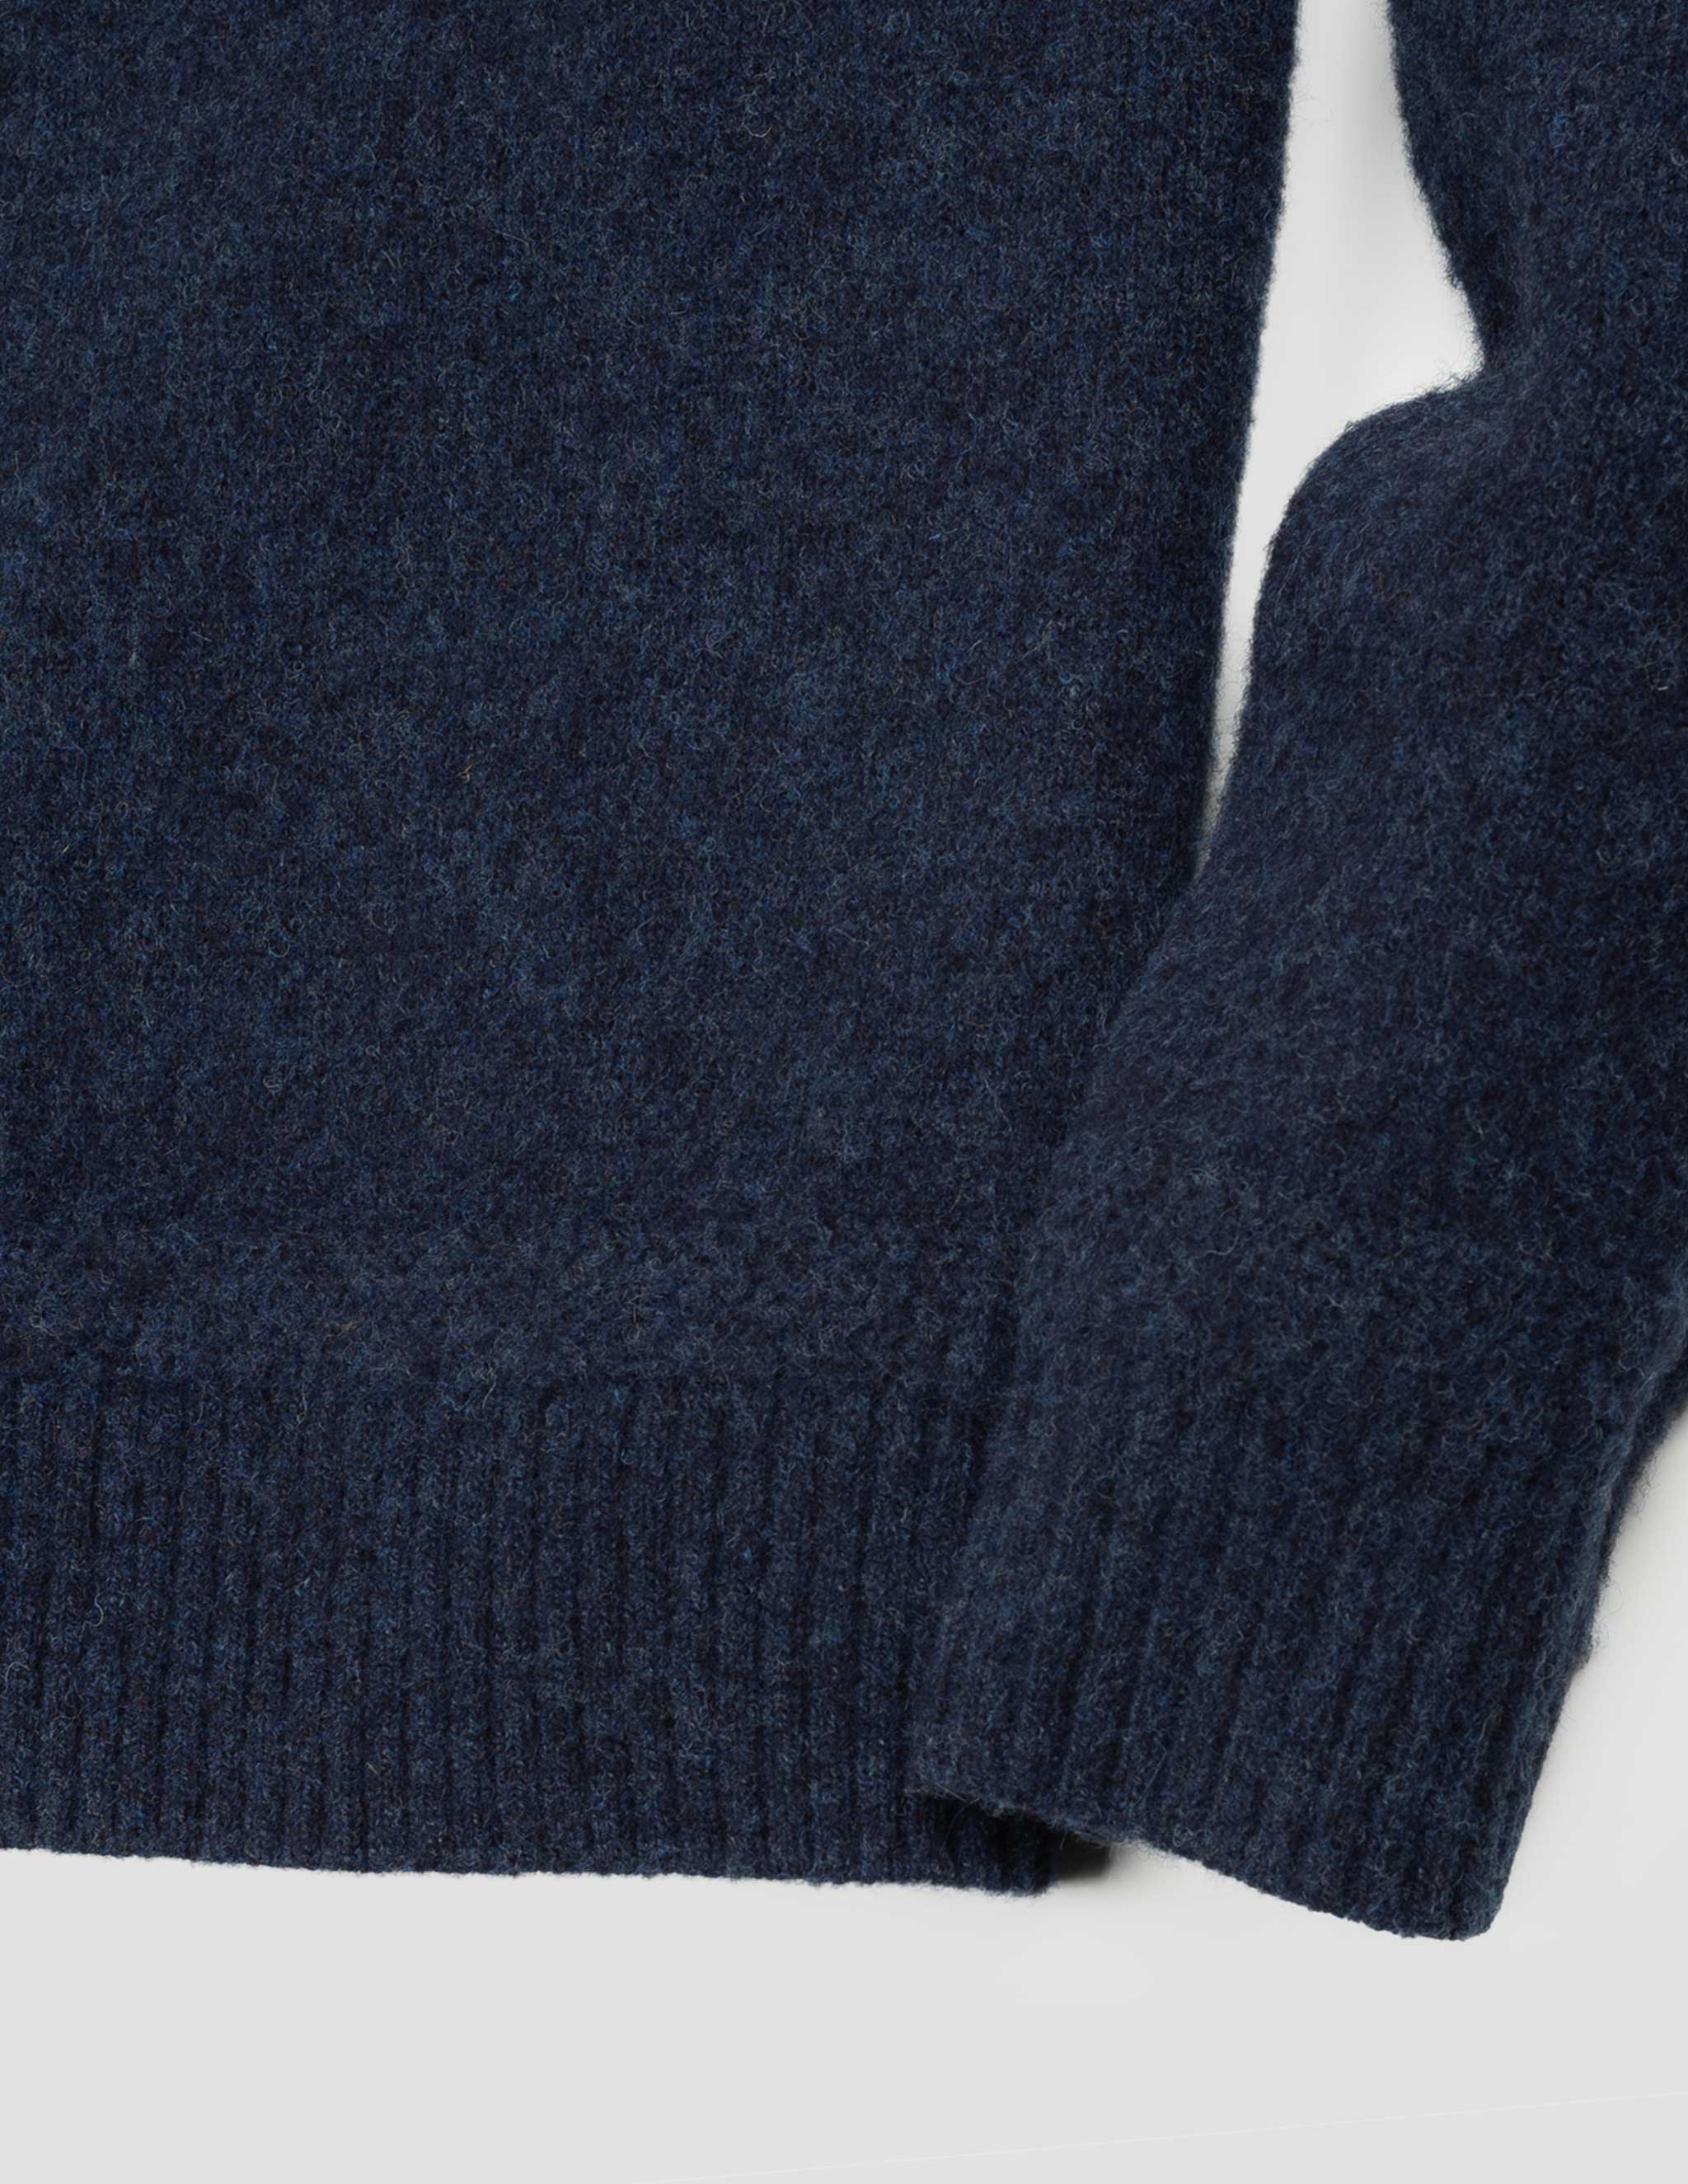 Highlands Shetland Sweater in Admiral Blue – RIVAY